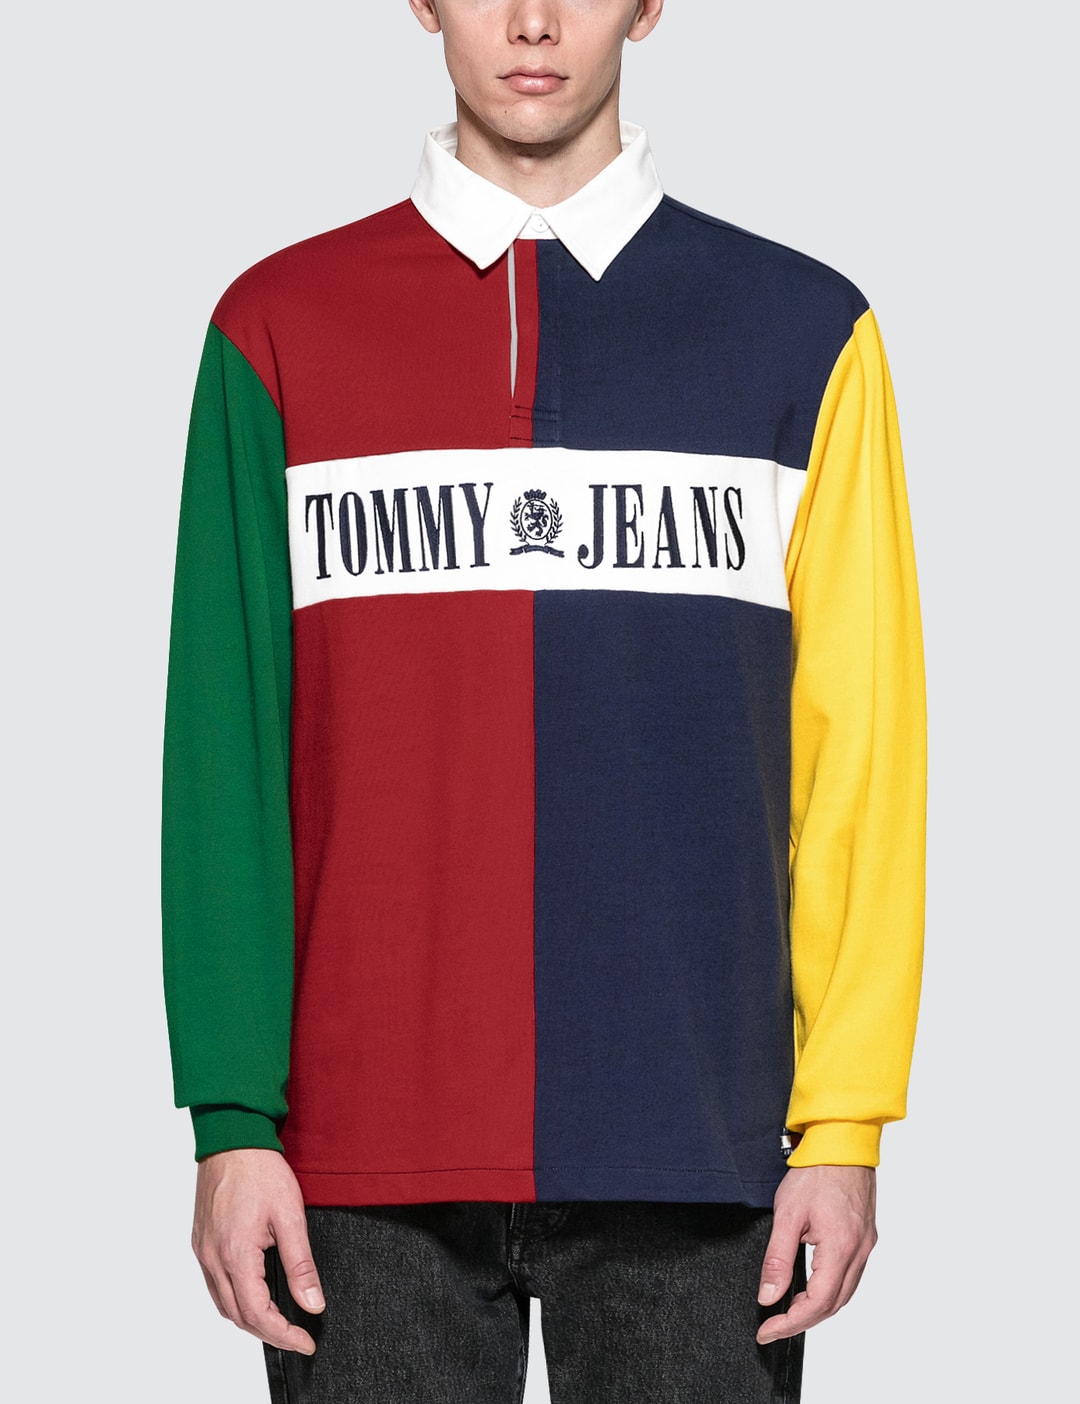 Tommy Jeans - Colorblock Shirt HBX - Globally Curated Fashion and Lifestyle by Hypebeast